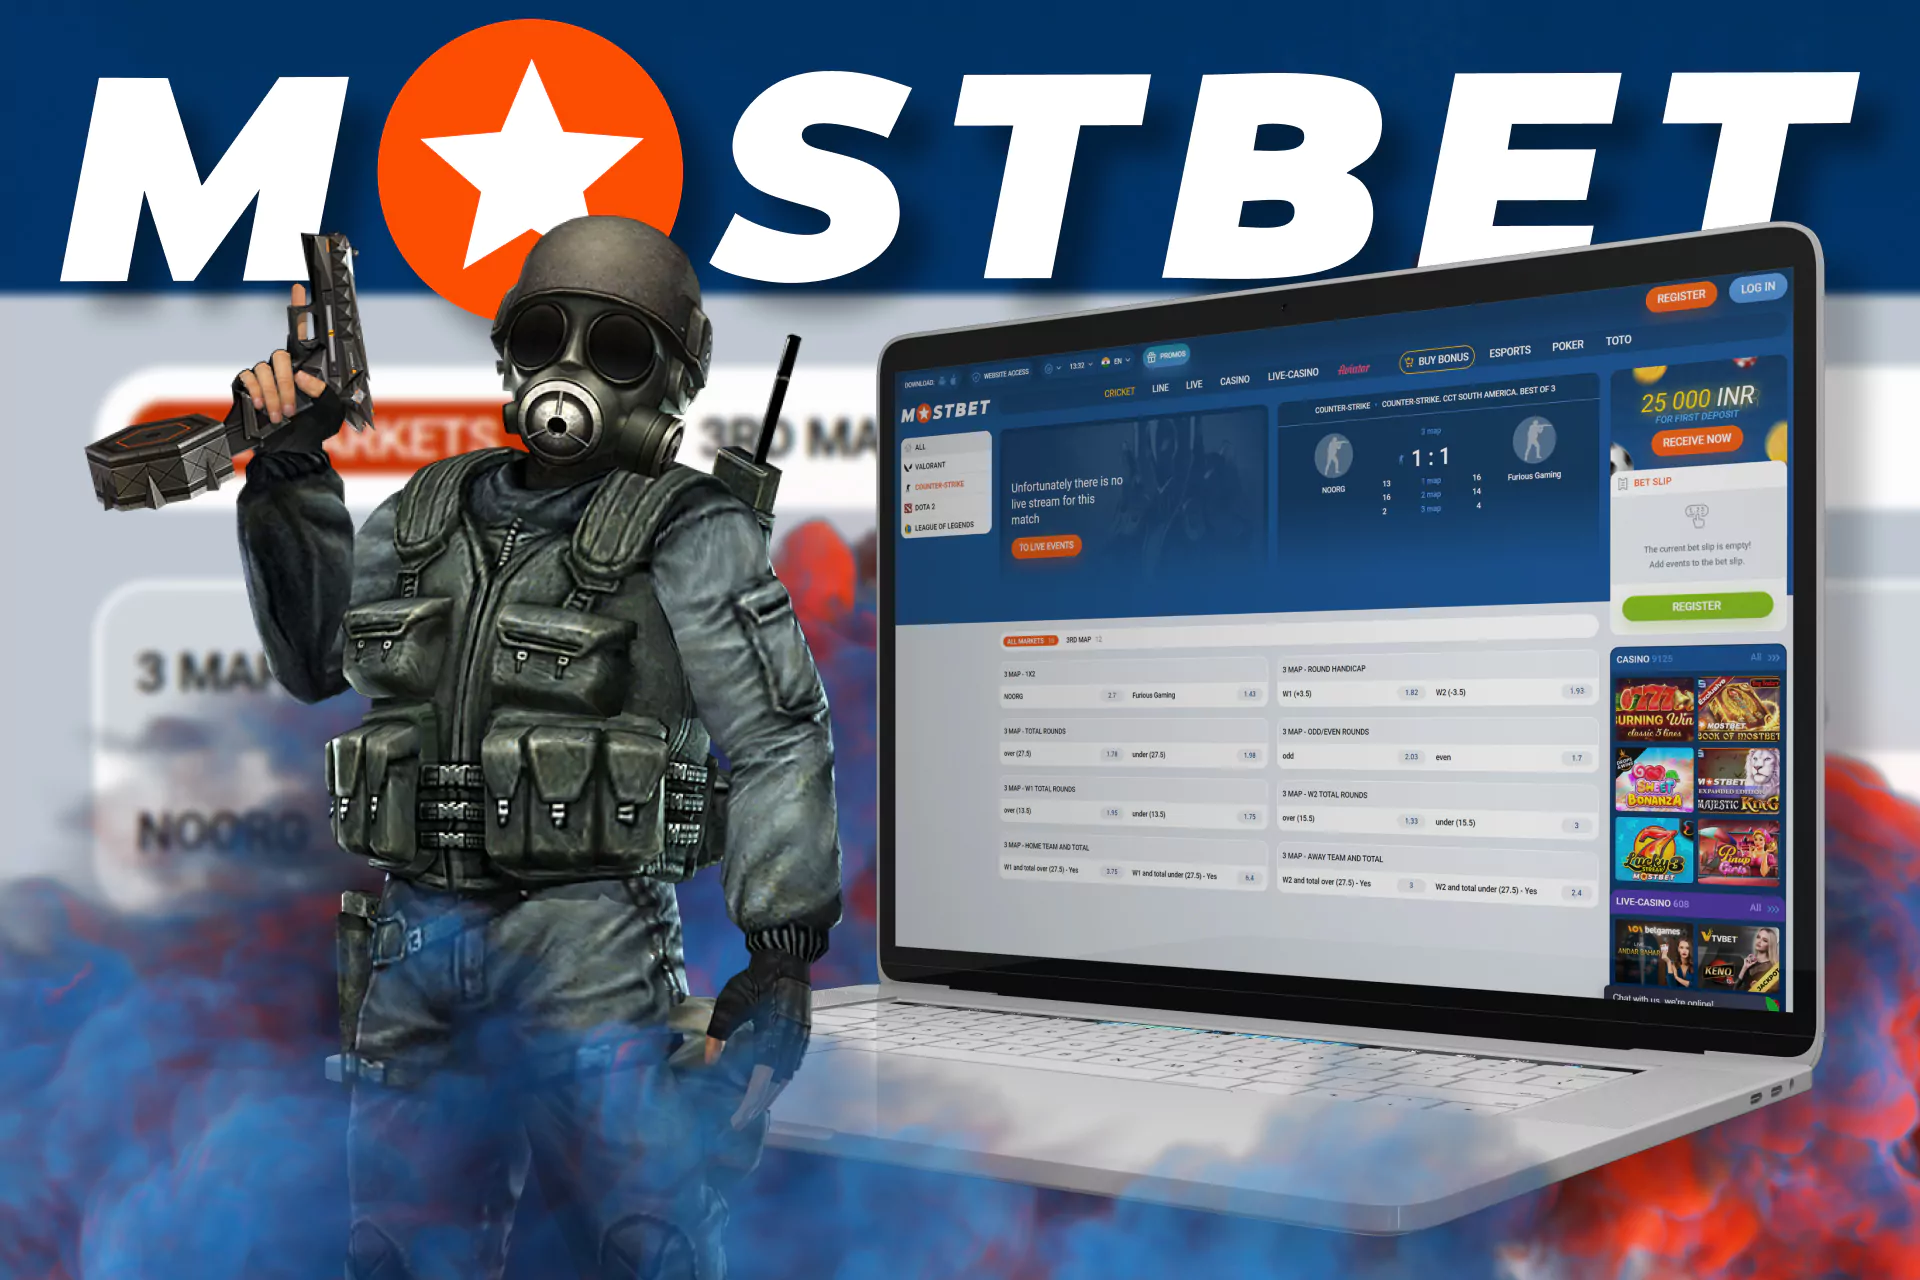 With Mostbet you can bet on different esports games.